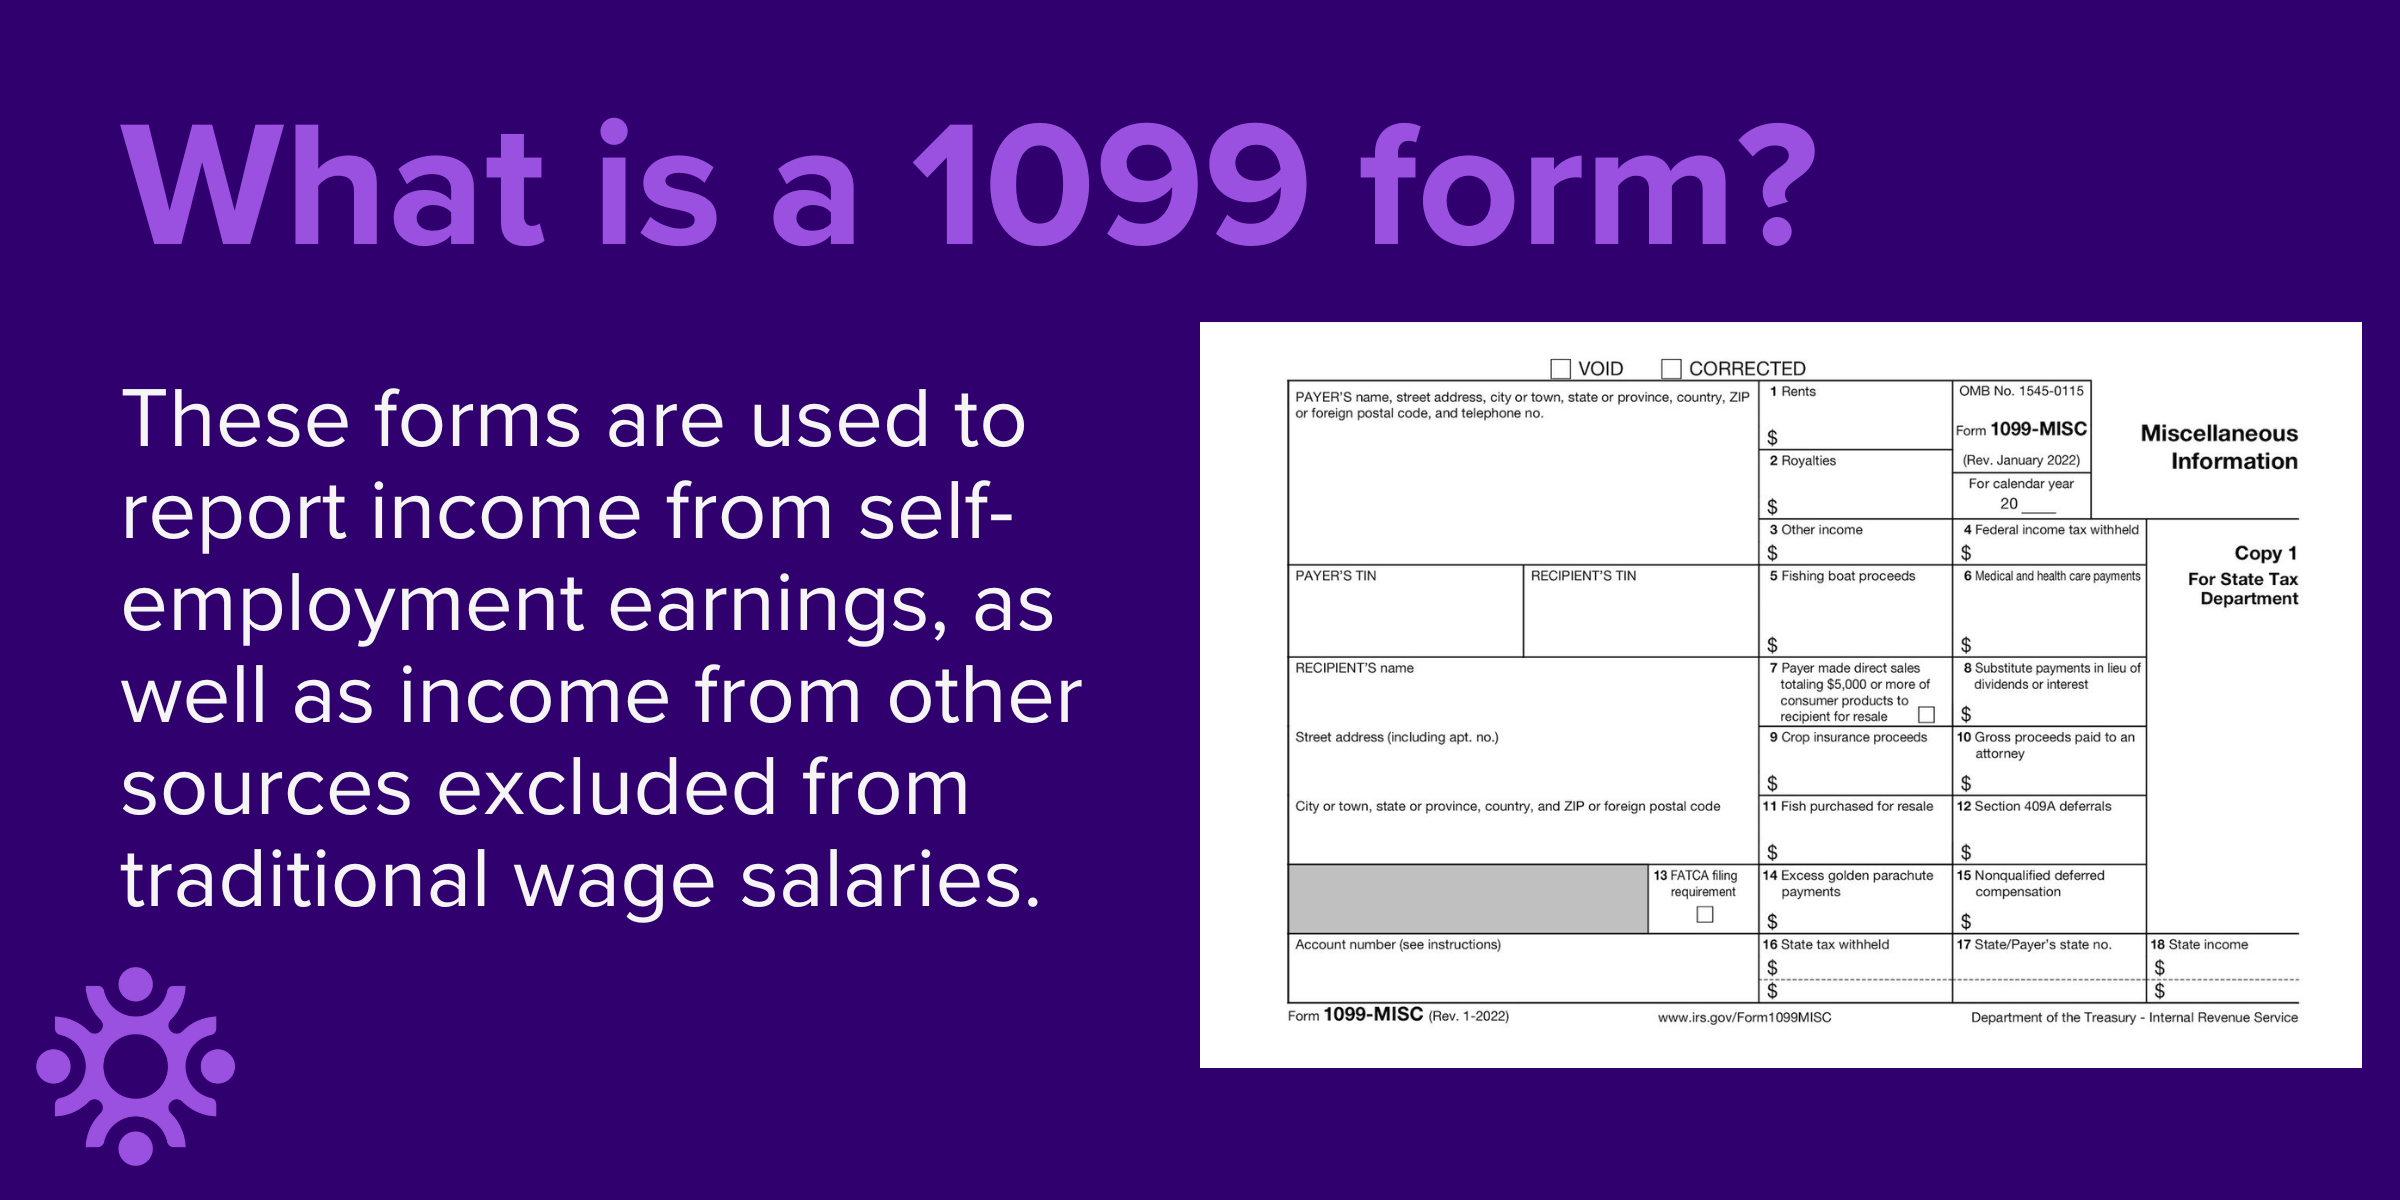 What is a 1099 form